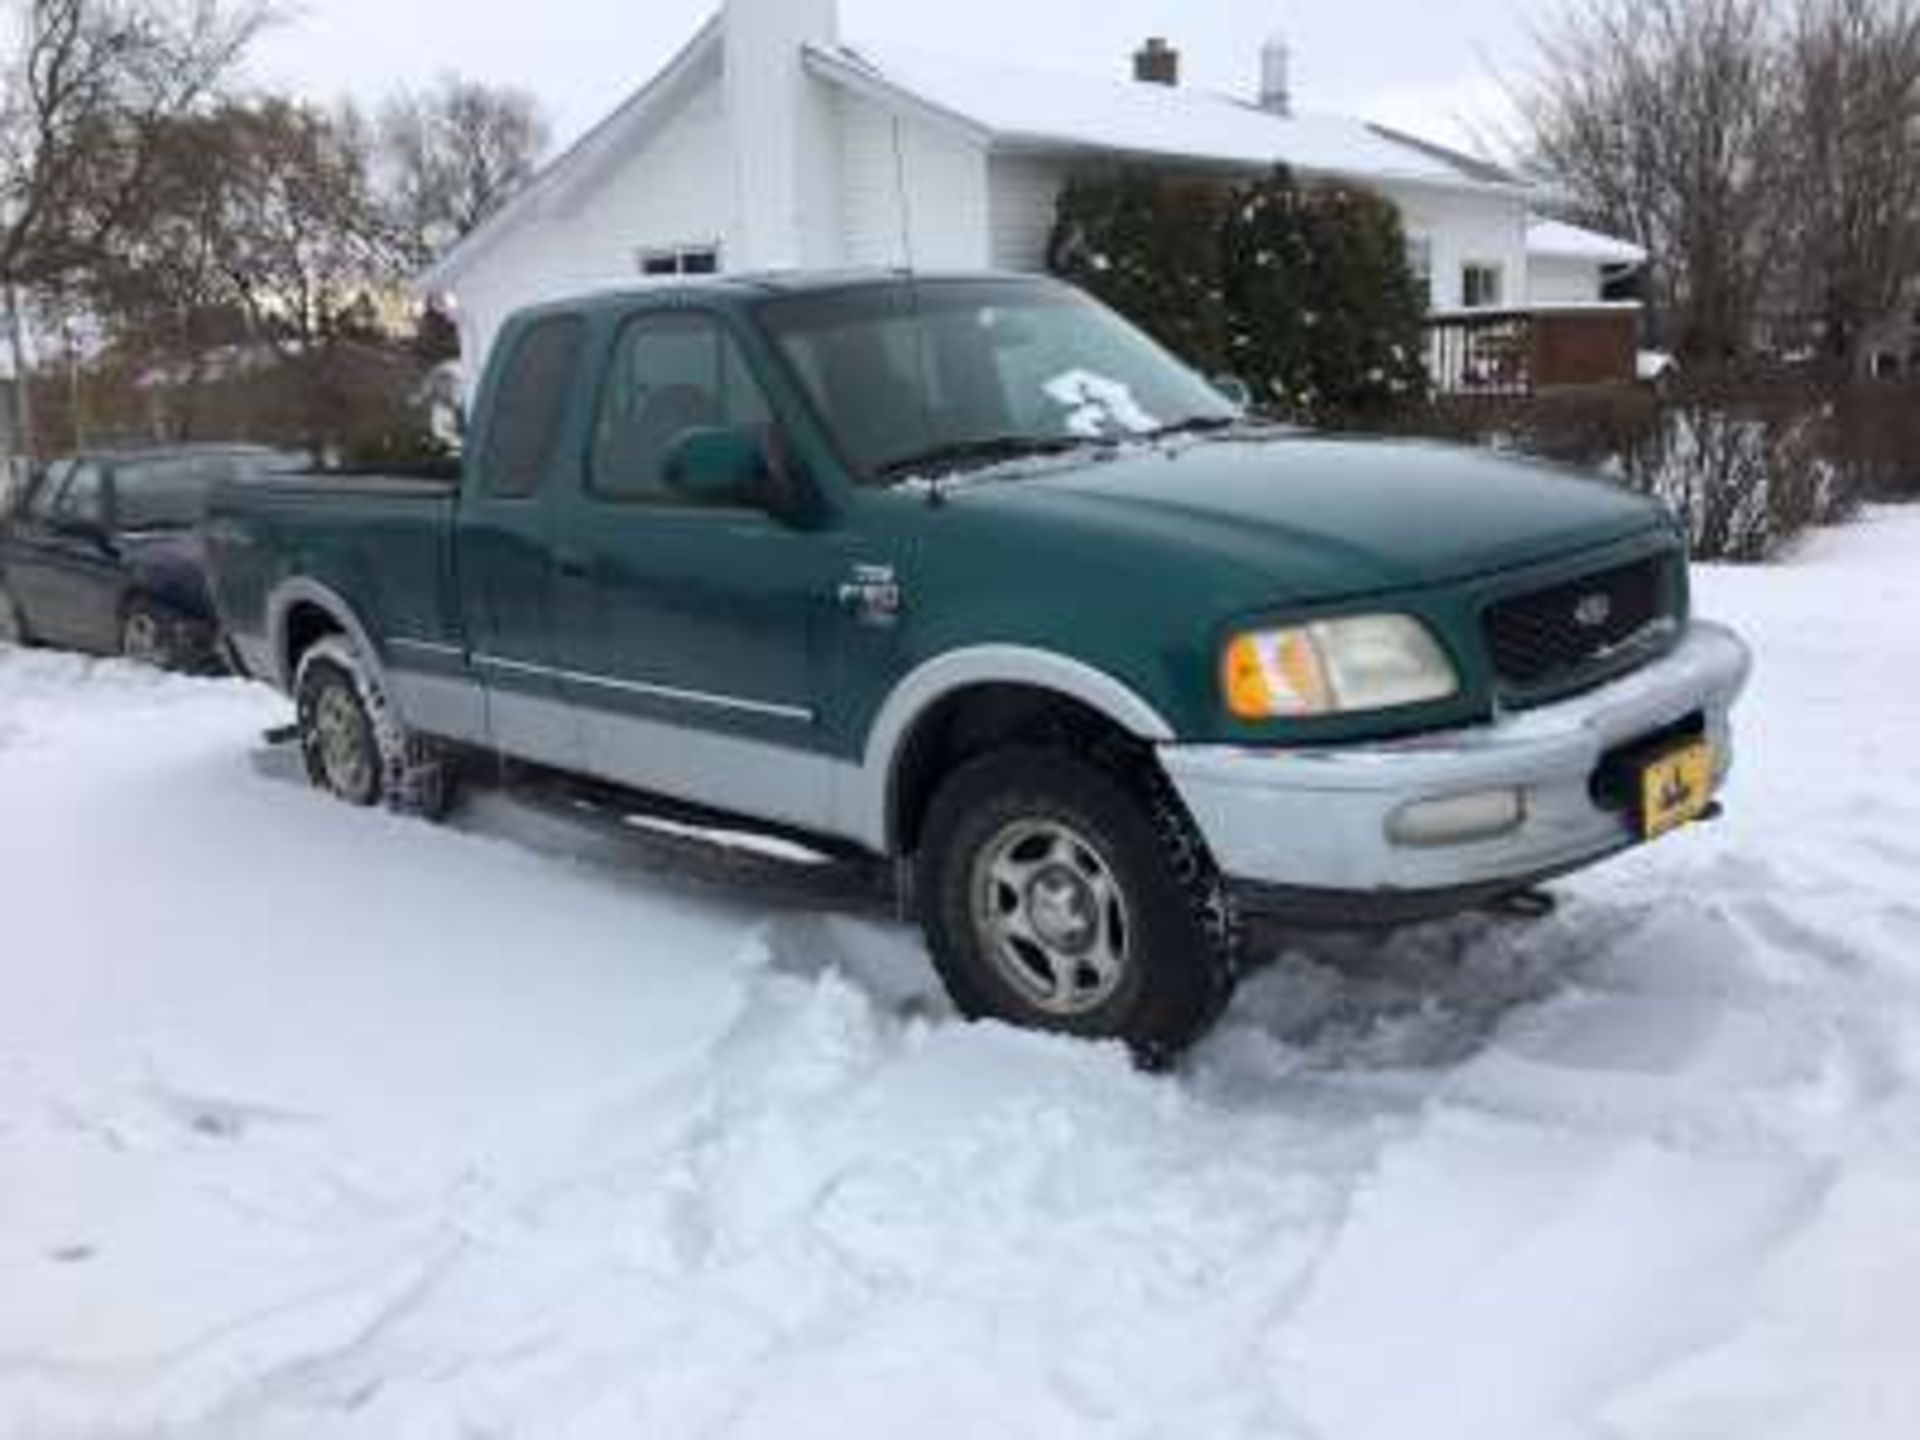 1998 Ford 4x4 Super Cab ½ ton, V8 Triton 5.4 lit, auto, s/n 2FTZX18W2WCA03Z57 (Previously registered - Image 3 of 4